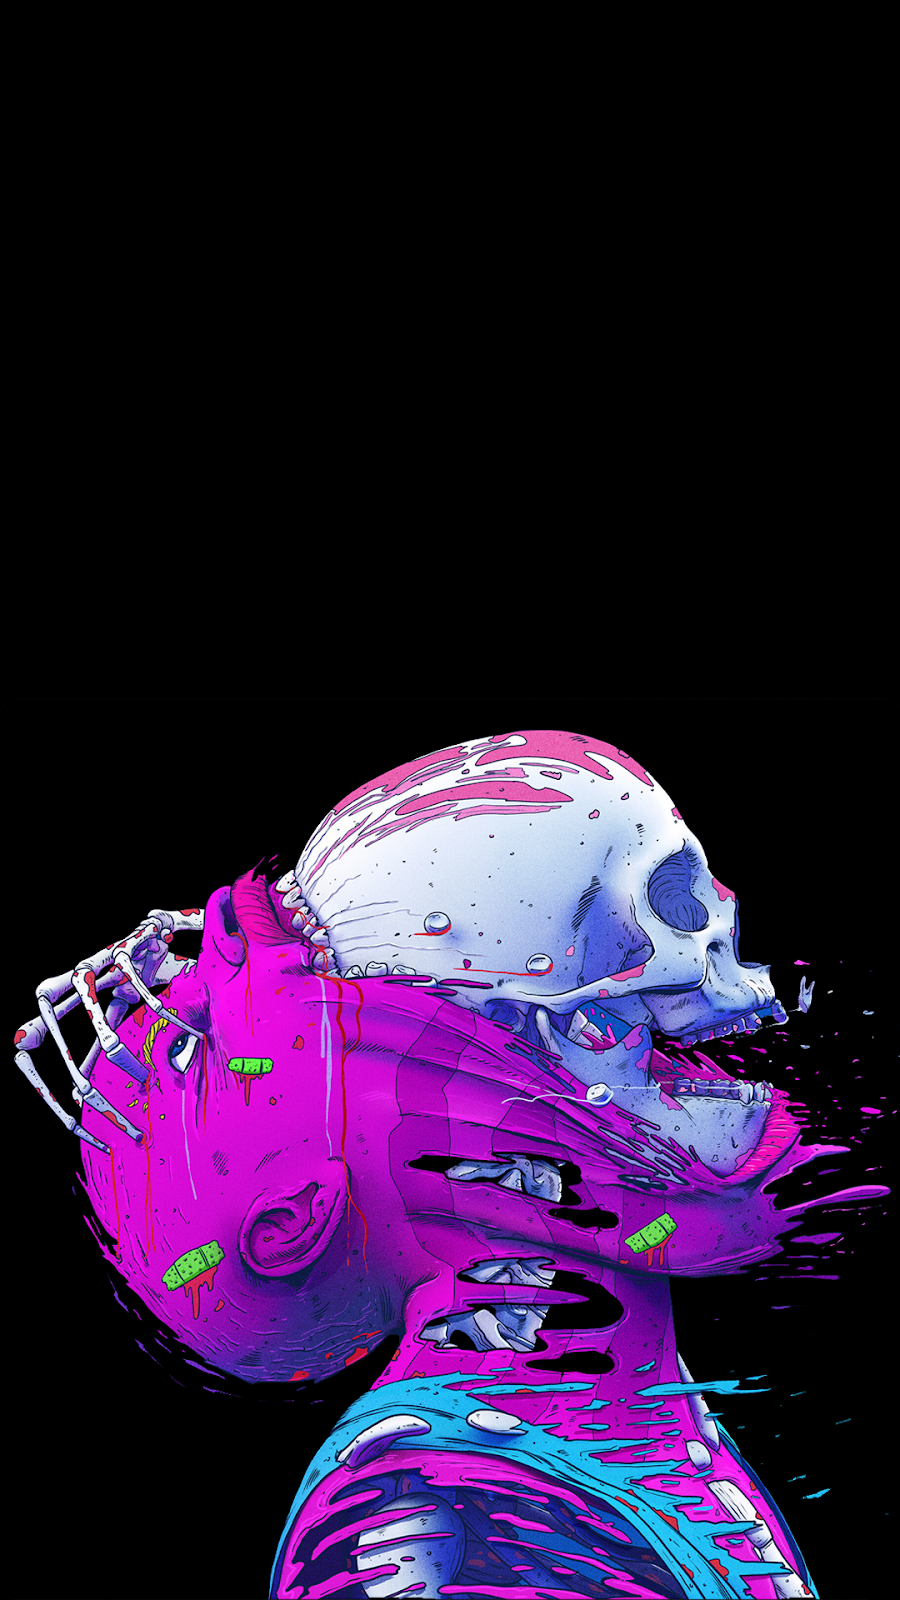 AMOLED PHONE WALLPAPER COLLECTION 122. Cool Wallpaper.cc. Skull wallpaper, Art wallpaper, Pop art wallpaper